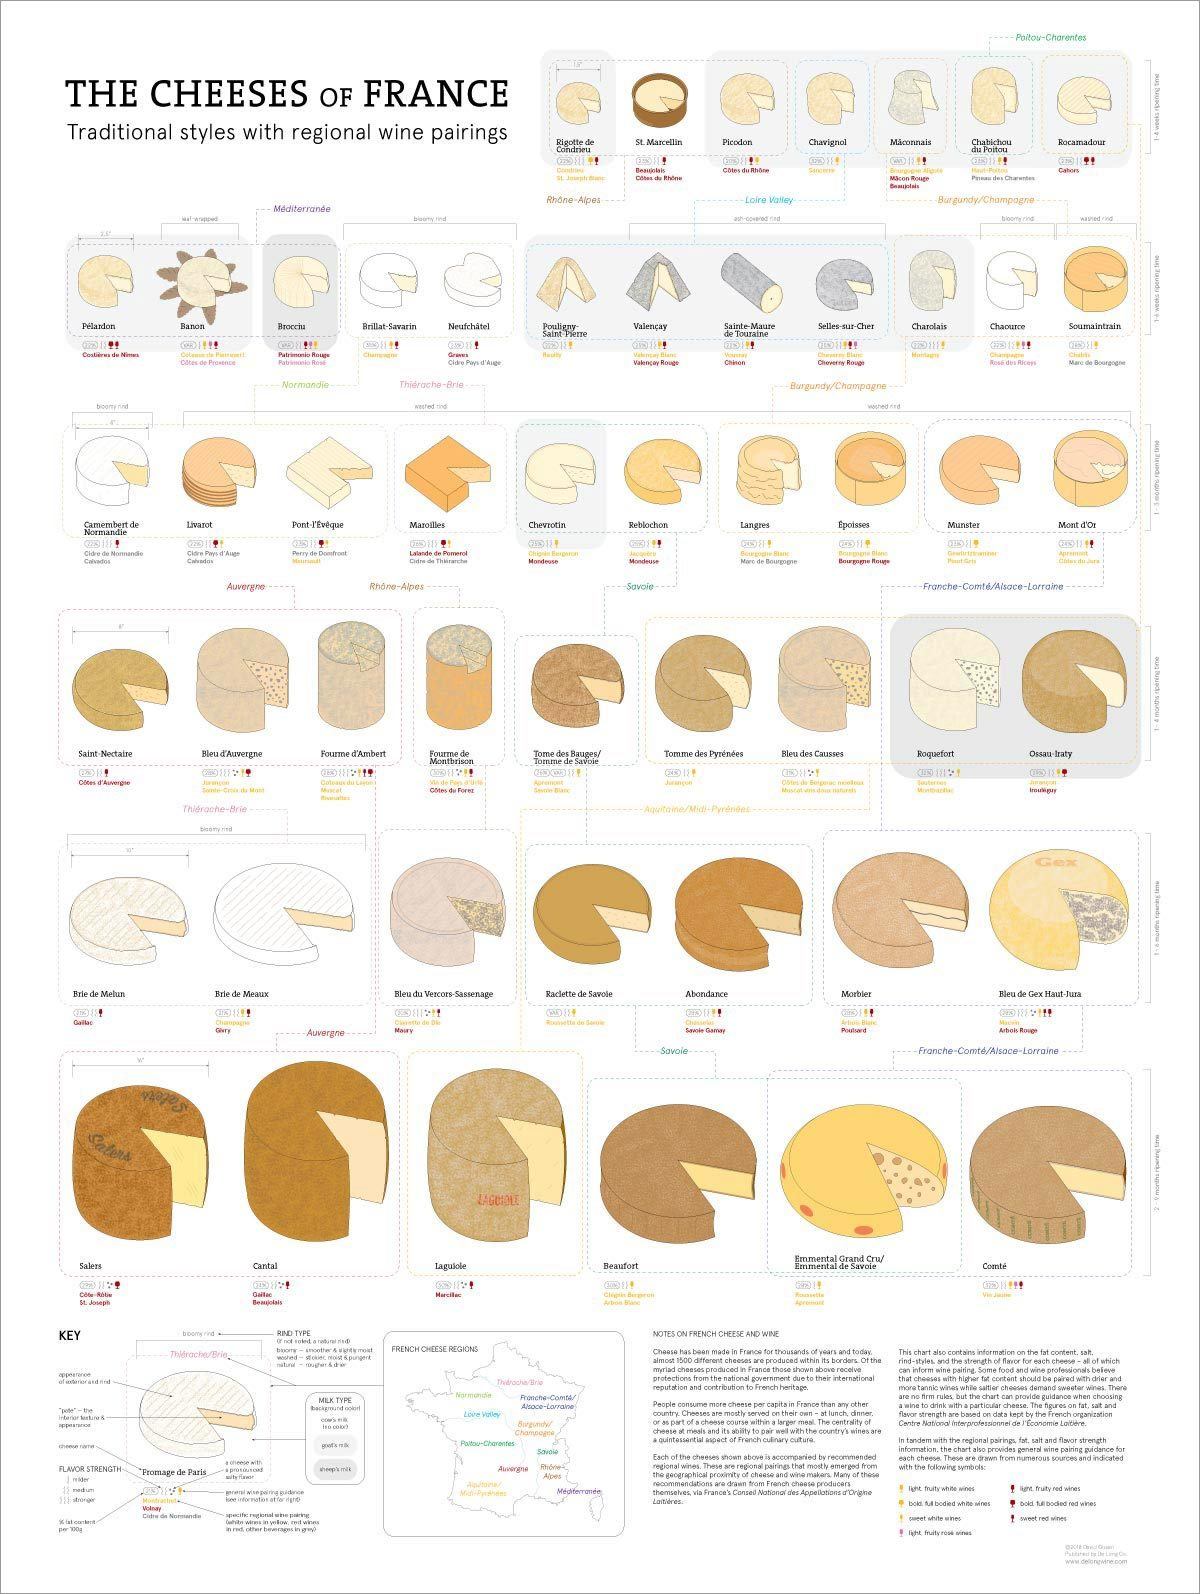 Cheeses of France